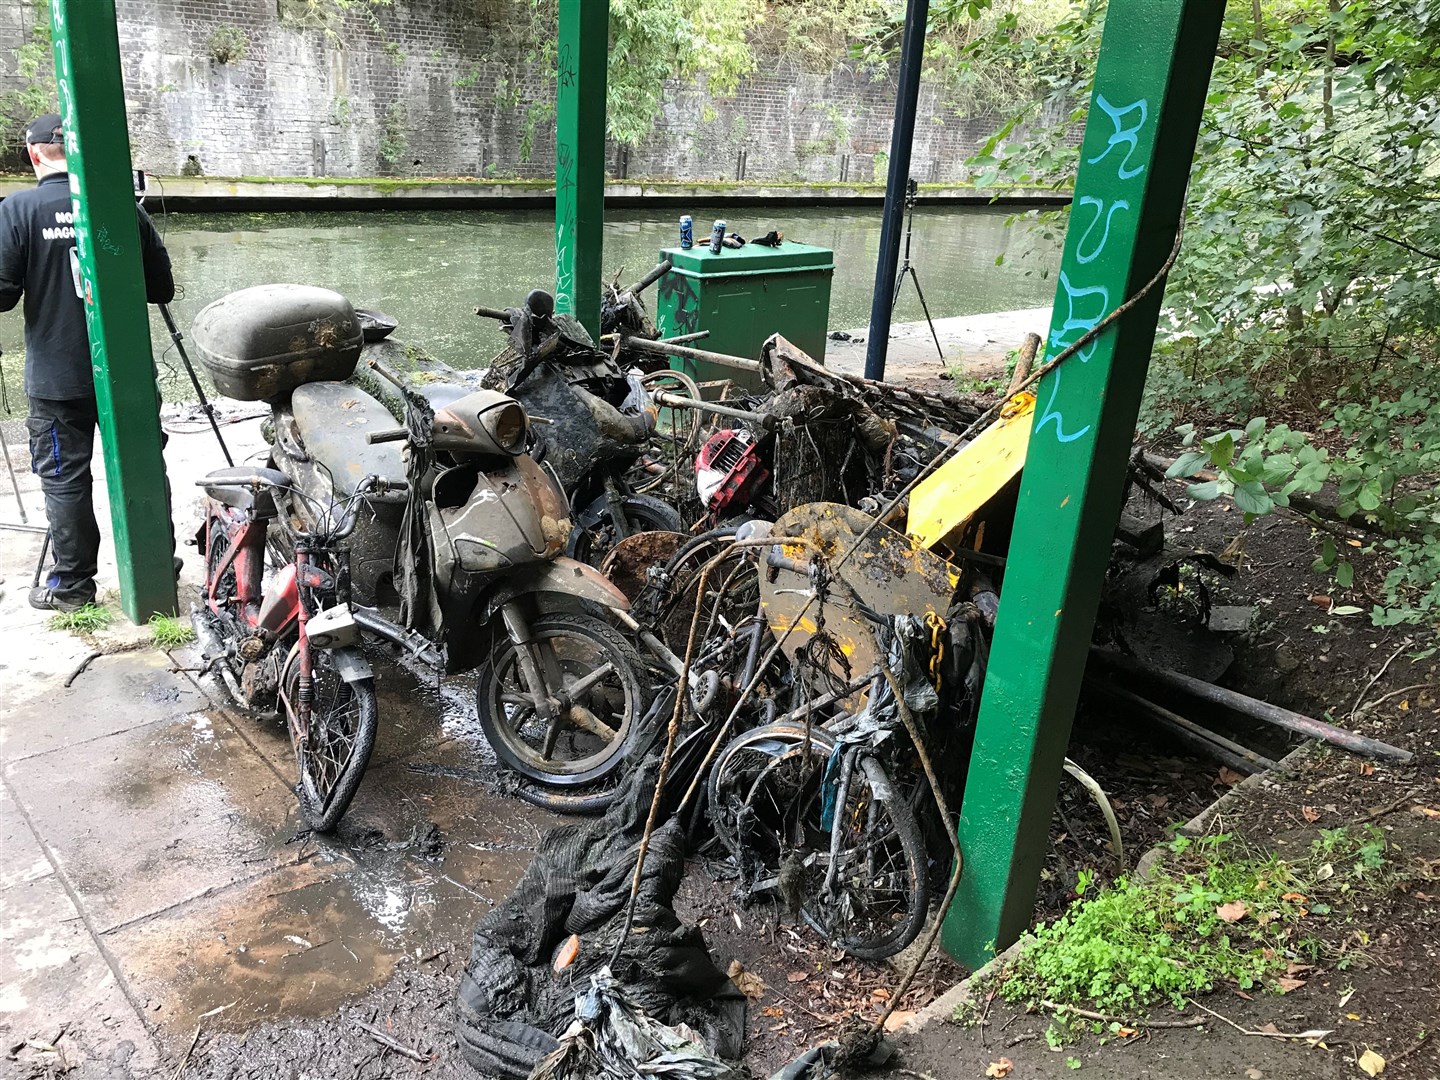 Motorbikes were among the items recovered from Regent’s Canal (Laura Parnaby/PA)